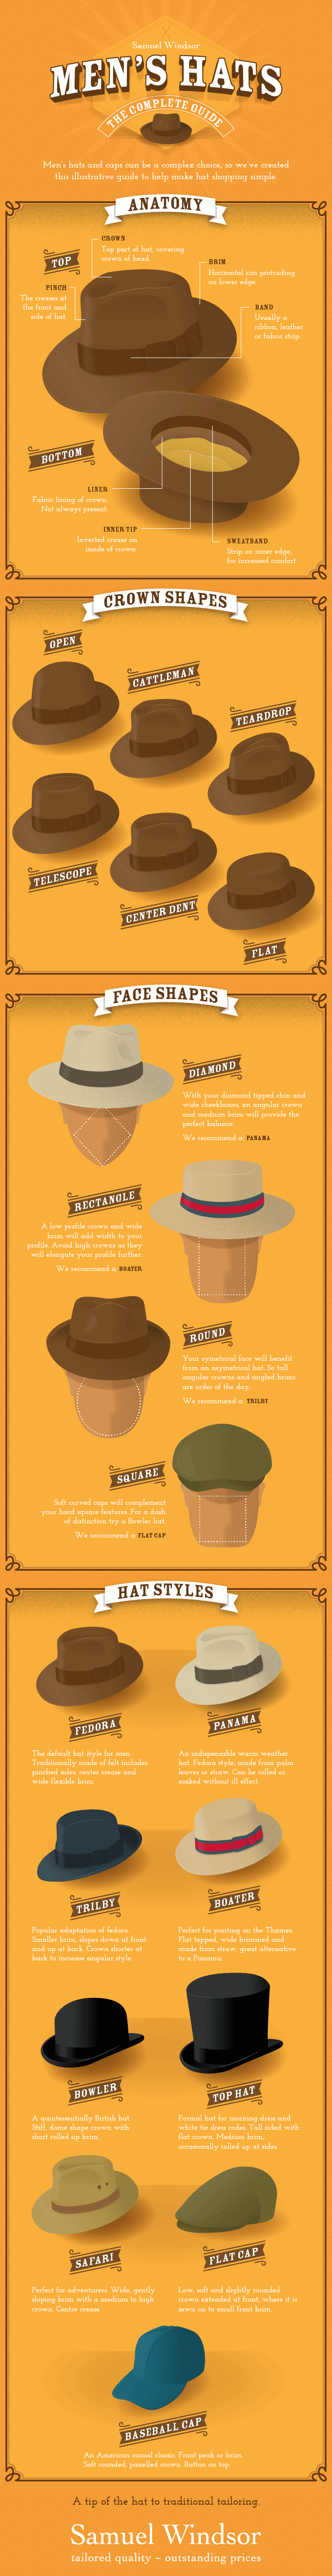 Mens Hats – The Complete Guide